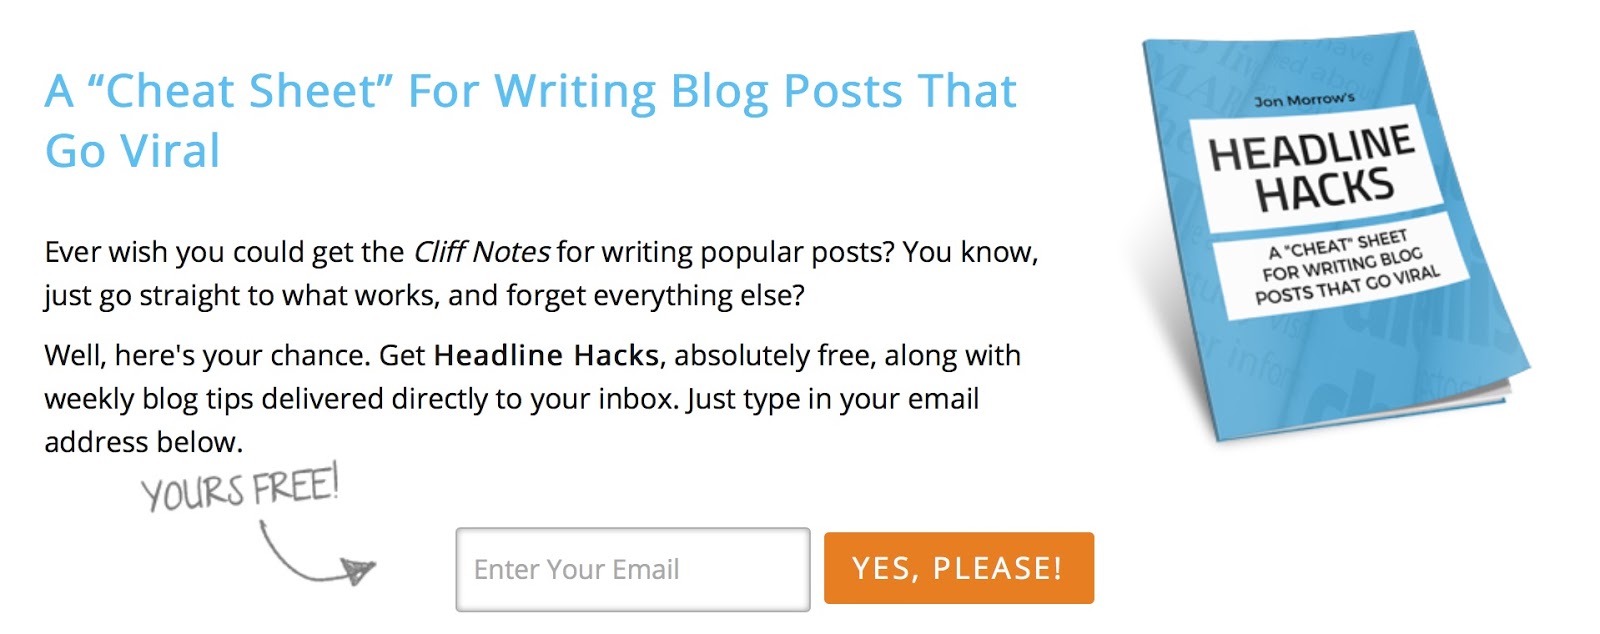 Smart Blogger: a cheat sheet for writing blog posts that go viral